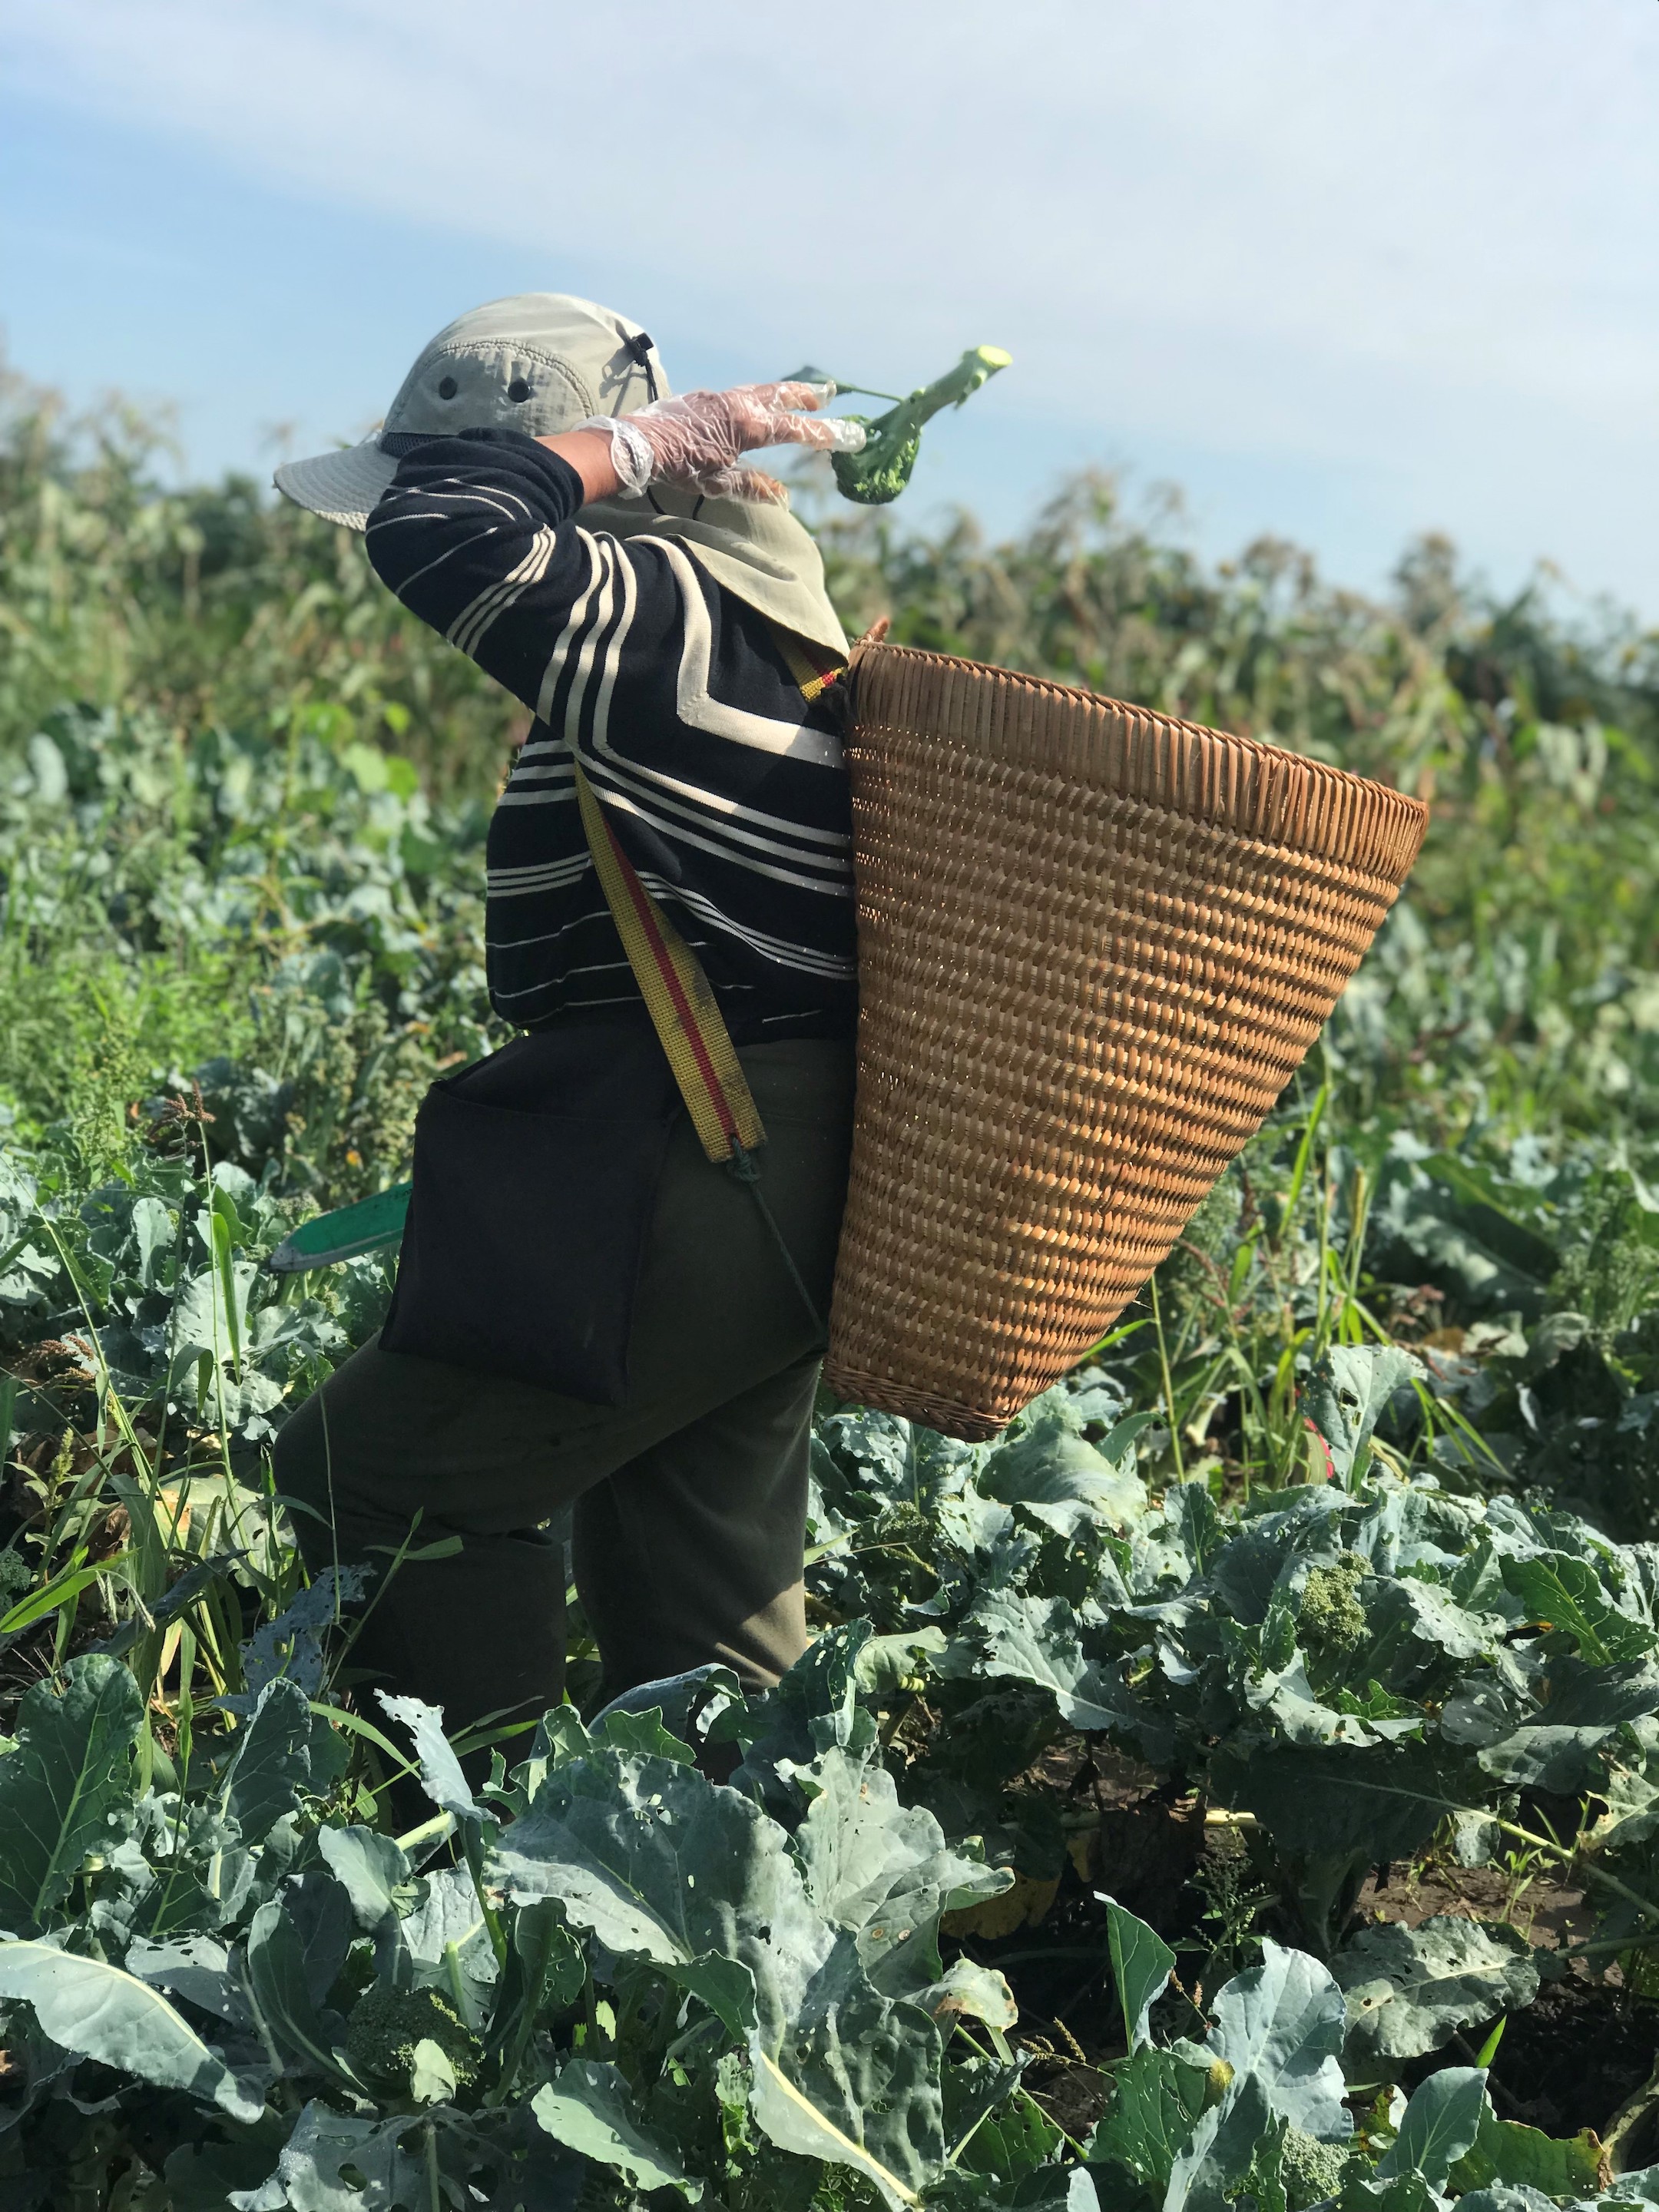 Through its Veggie Rx program, HAFA delivers traditional, fresh Hmong produce throughout the community, especially to groups working with children.